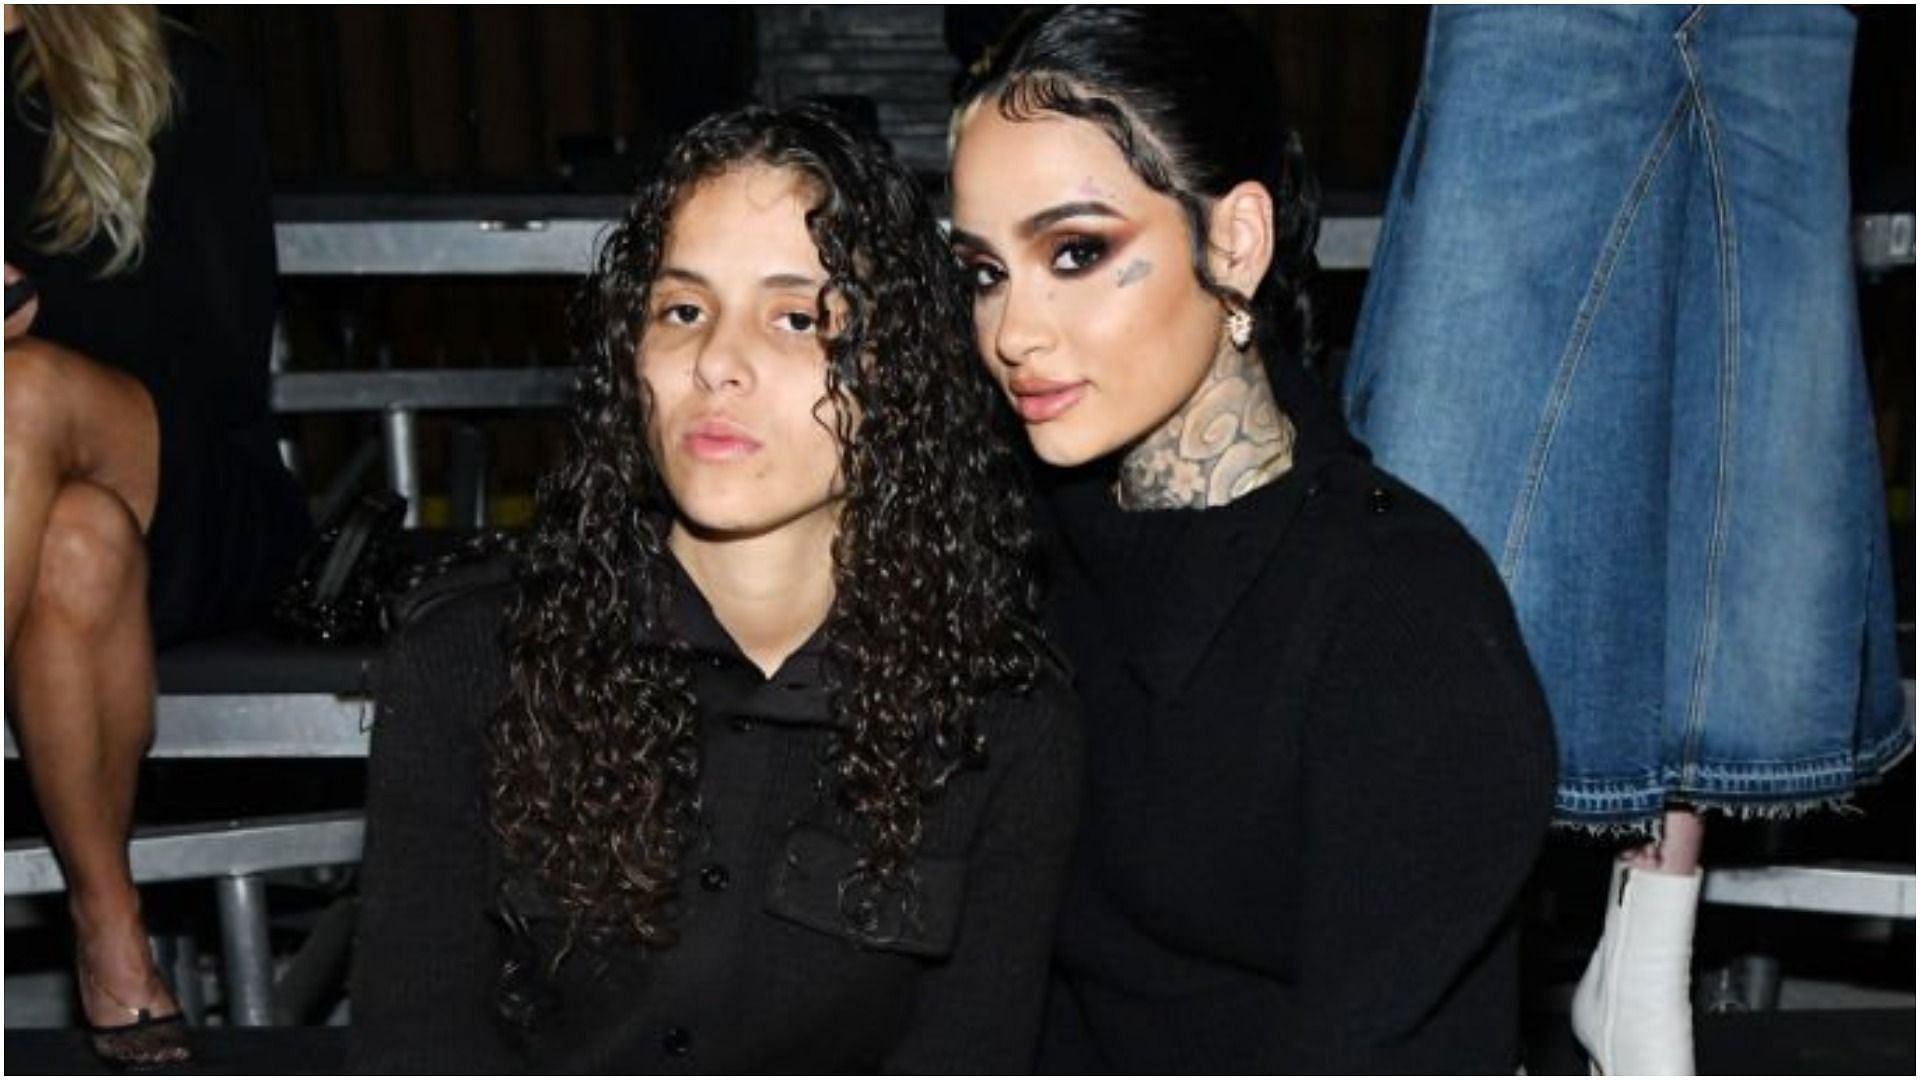 Kehlani and 070 Shake have confirmed their romance in a new music video (Image via Craig Barritt/Getty Images)